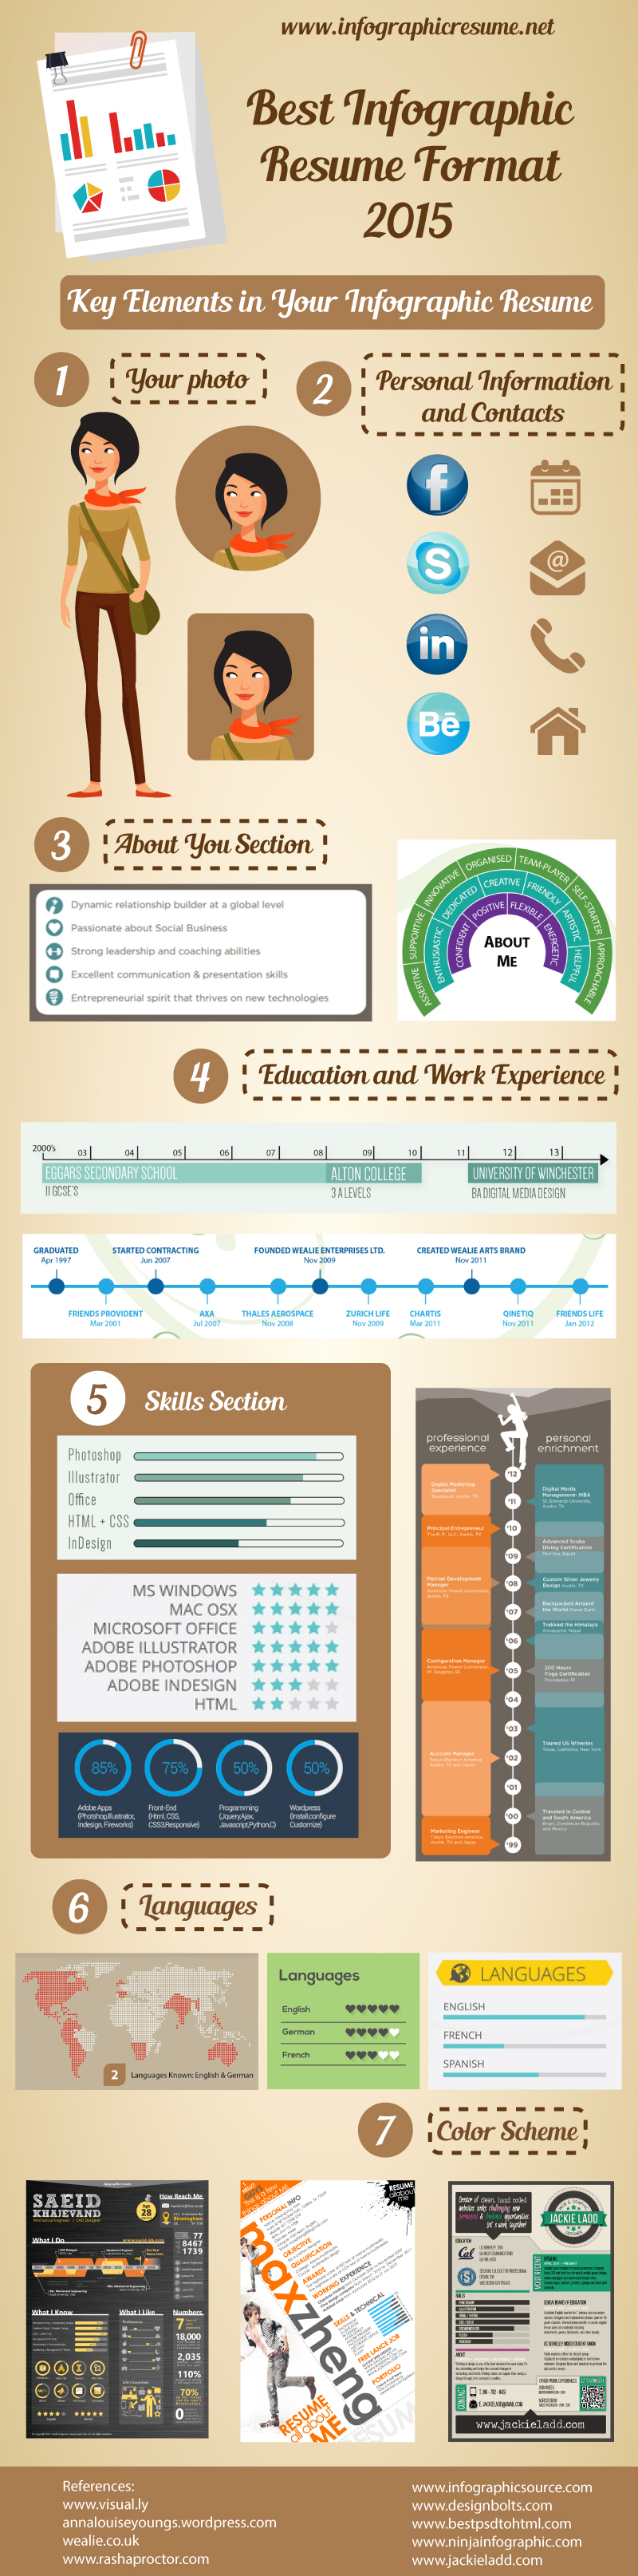 best infographic resume format 2015 ucollect infographics